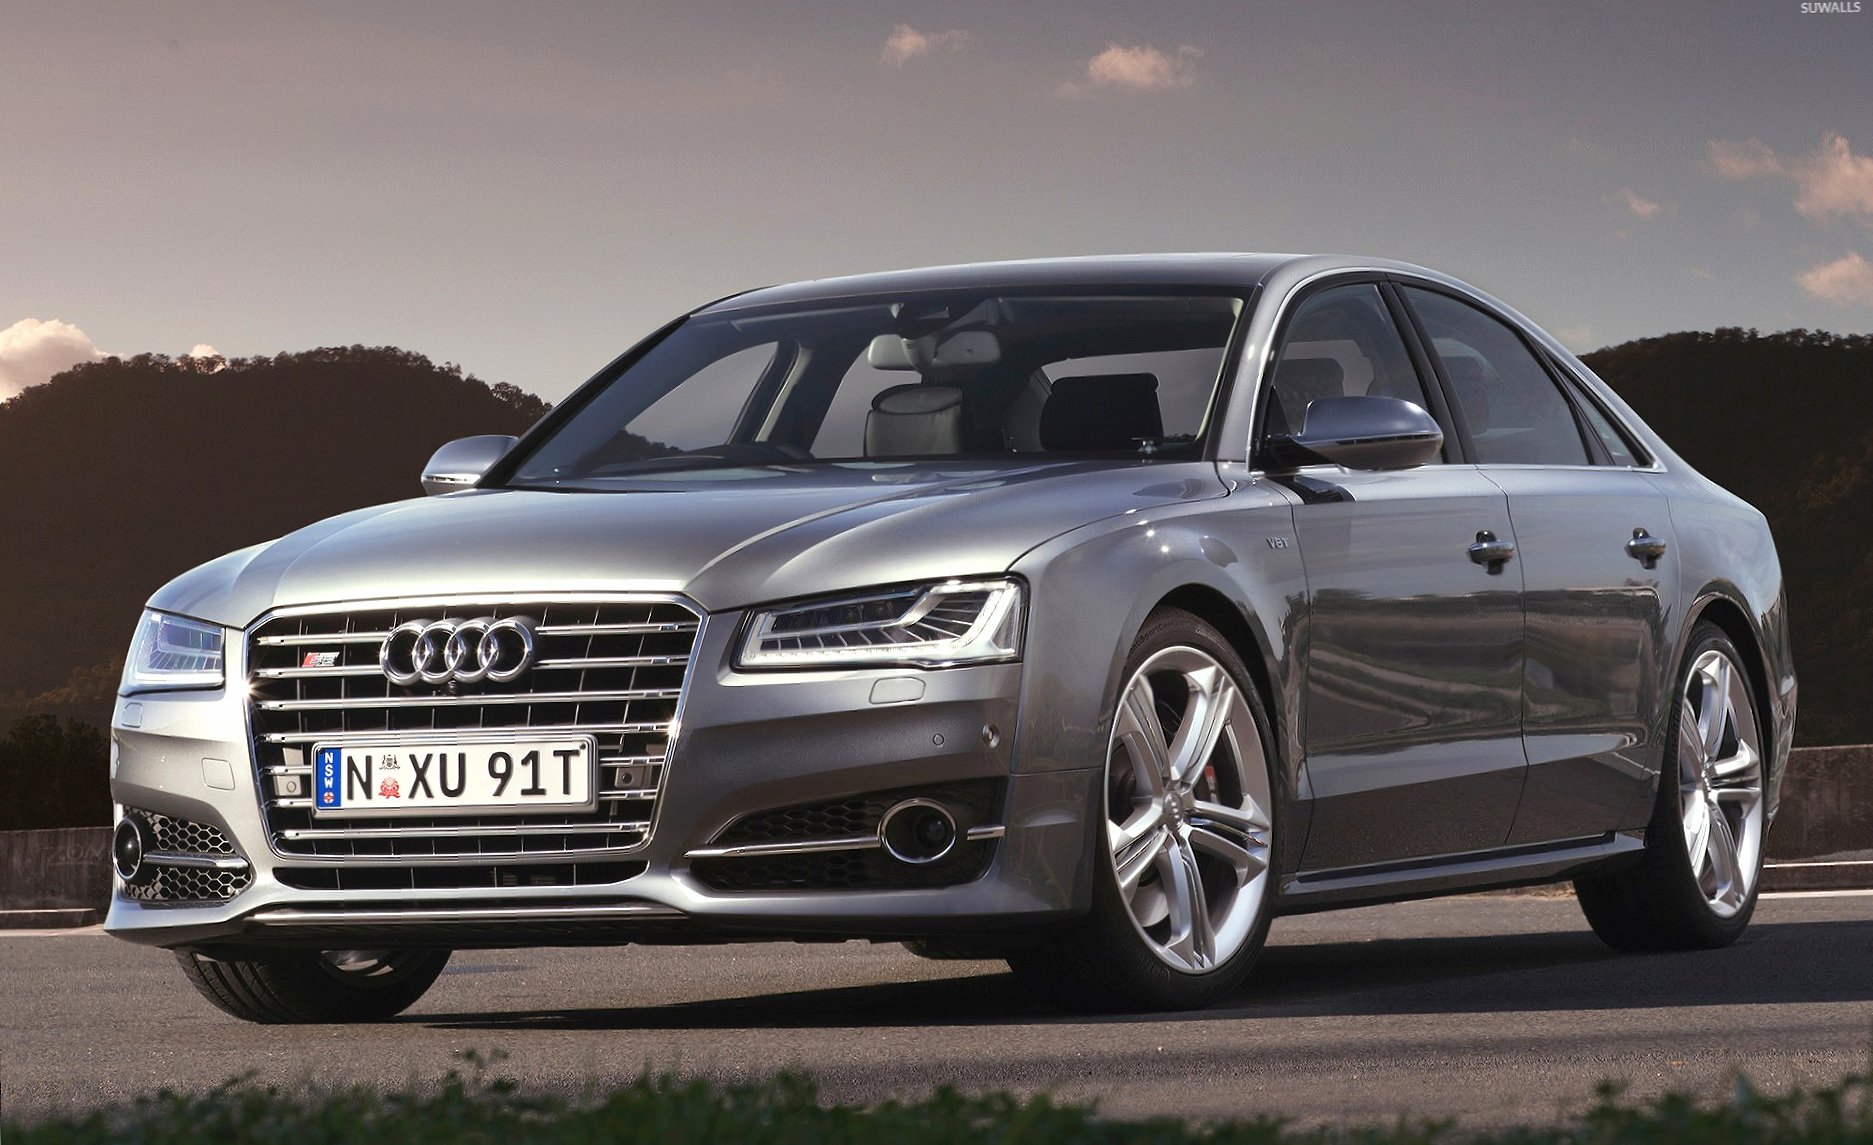 2015 Audi S8 front view wallpapers HD quality